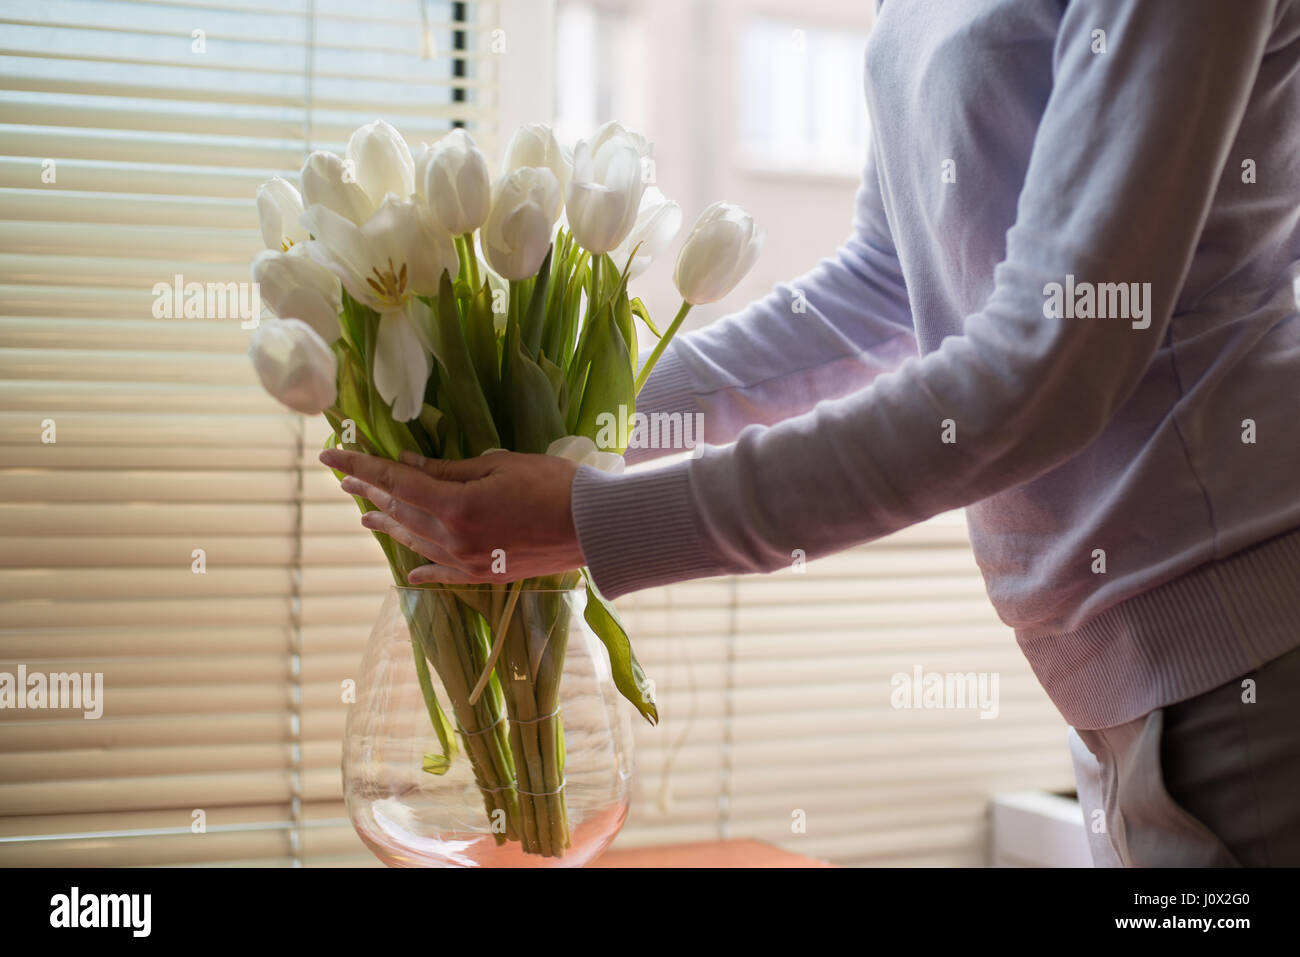 Woman arranging tulips in a vase Stock Photo